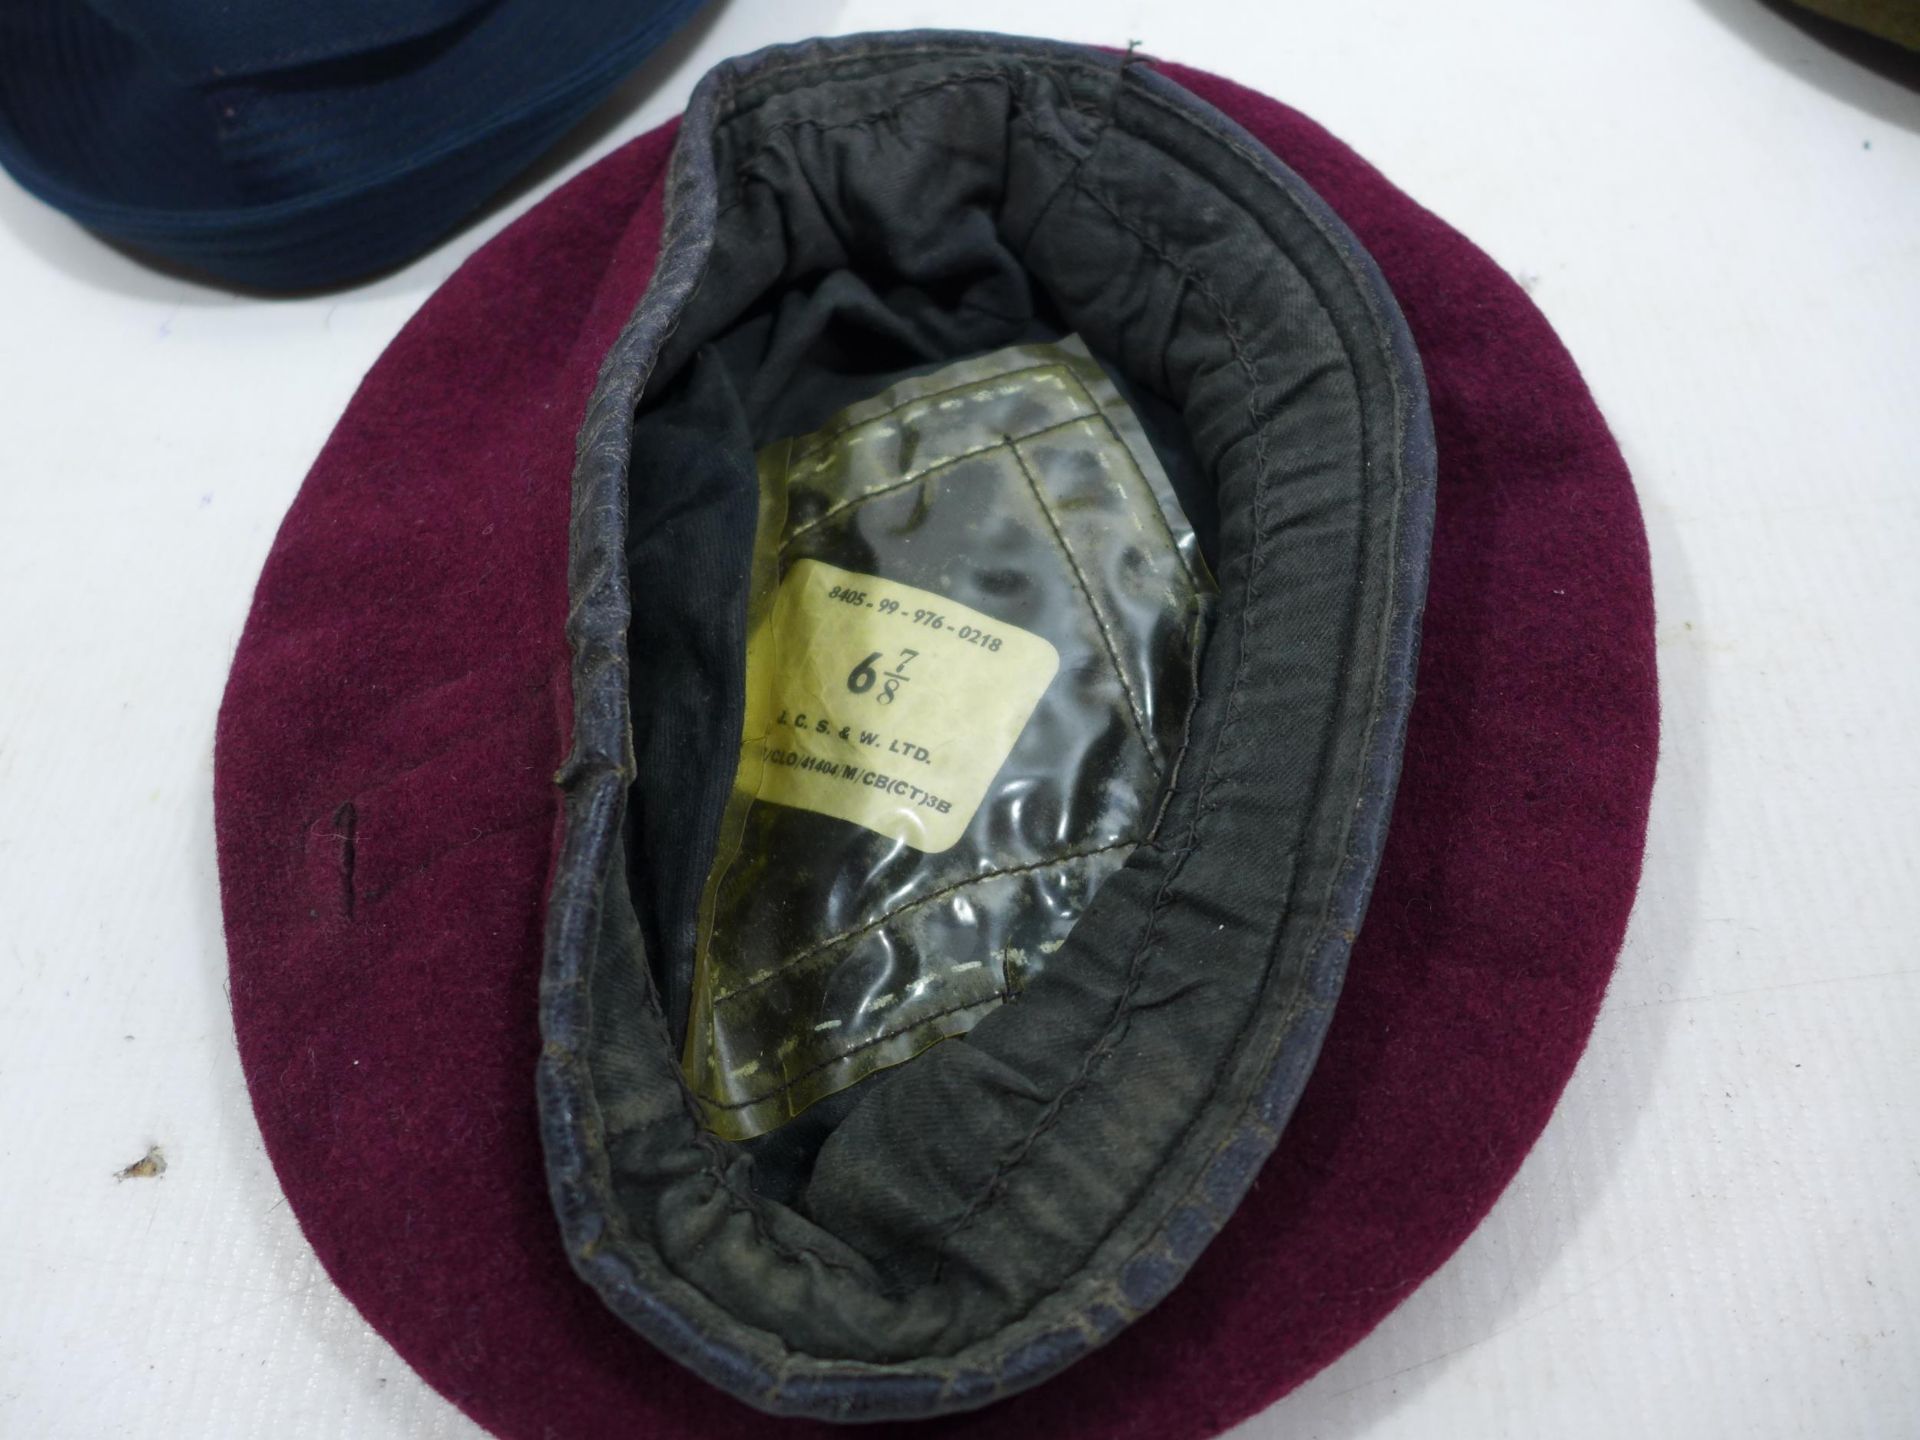 A PARATROOPERS RED BERET SIZE 6 7/8, ARMY BERET SIZE 7 1/8, WRENS HAT SIZE 6 1/4, BELT AND GLOVE - Image 3 of 4